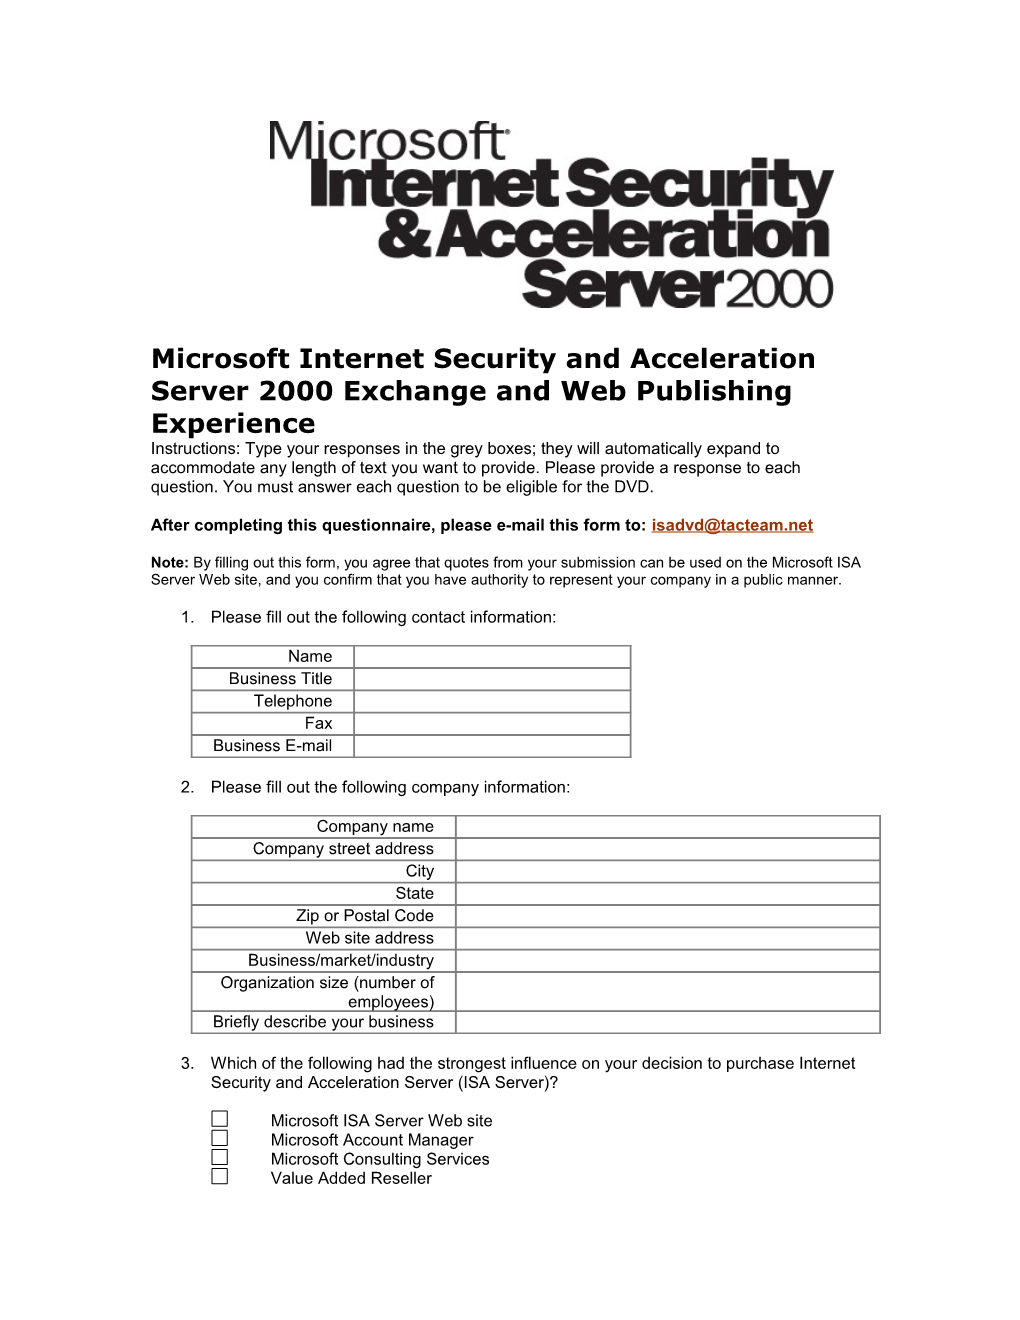 Microsoft Internet Security and Acceleration Server 2000Exchange and Web Publishing Experience